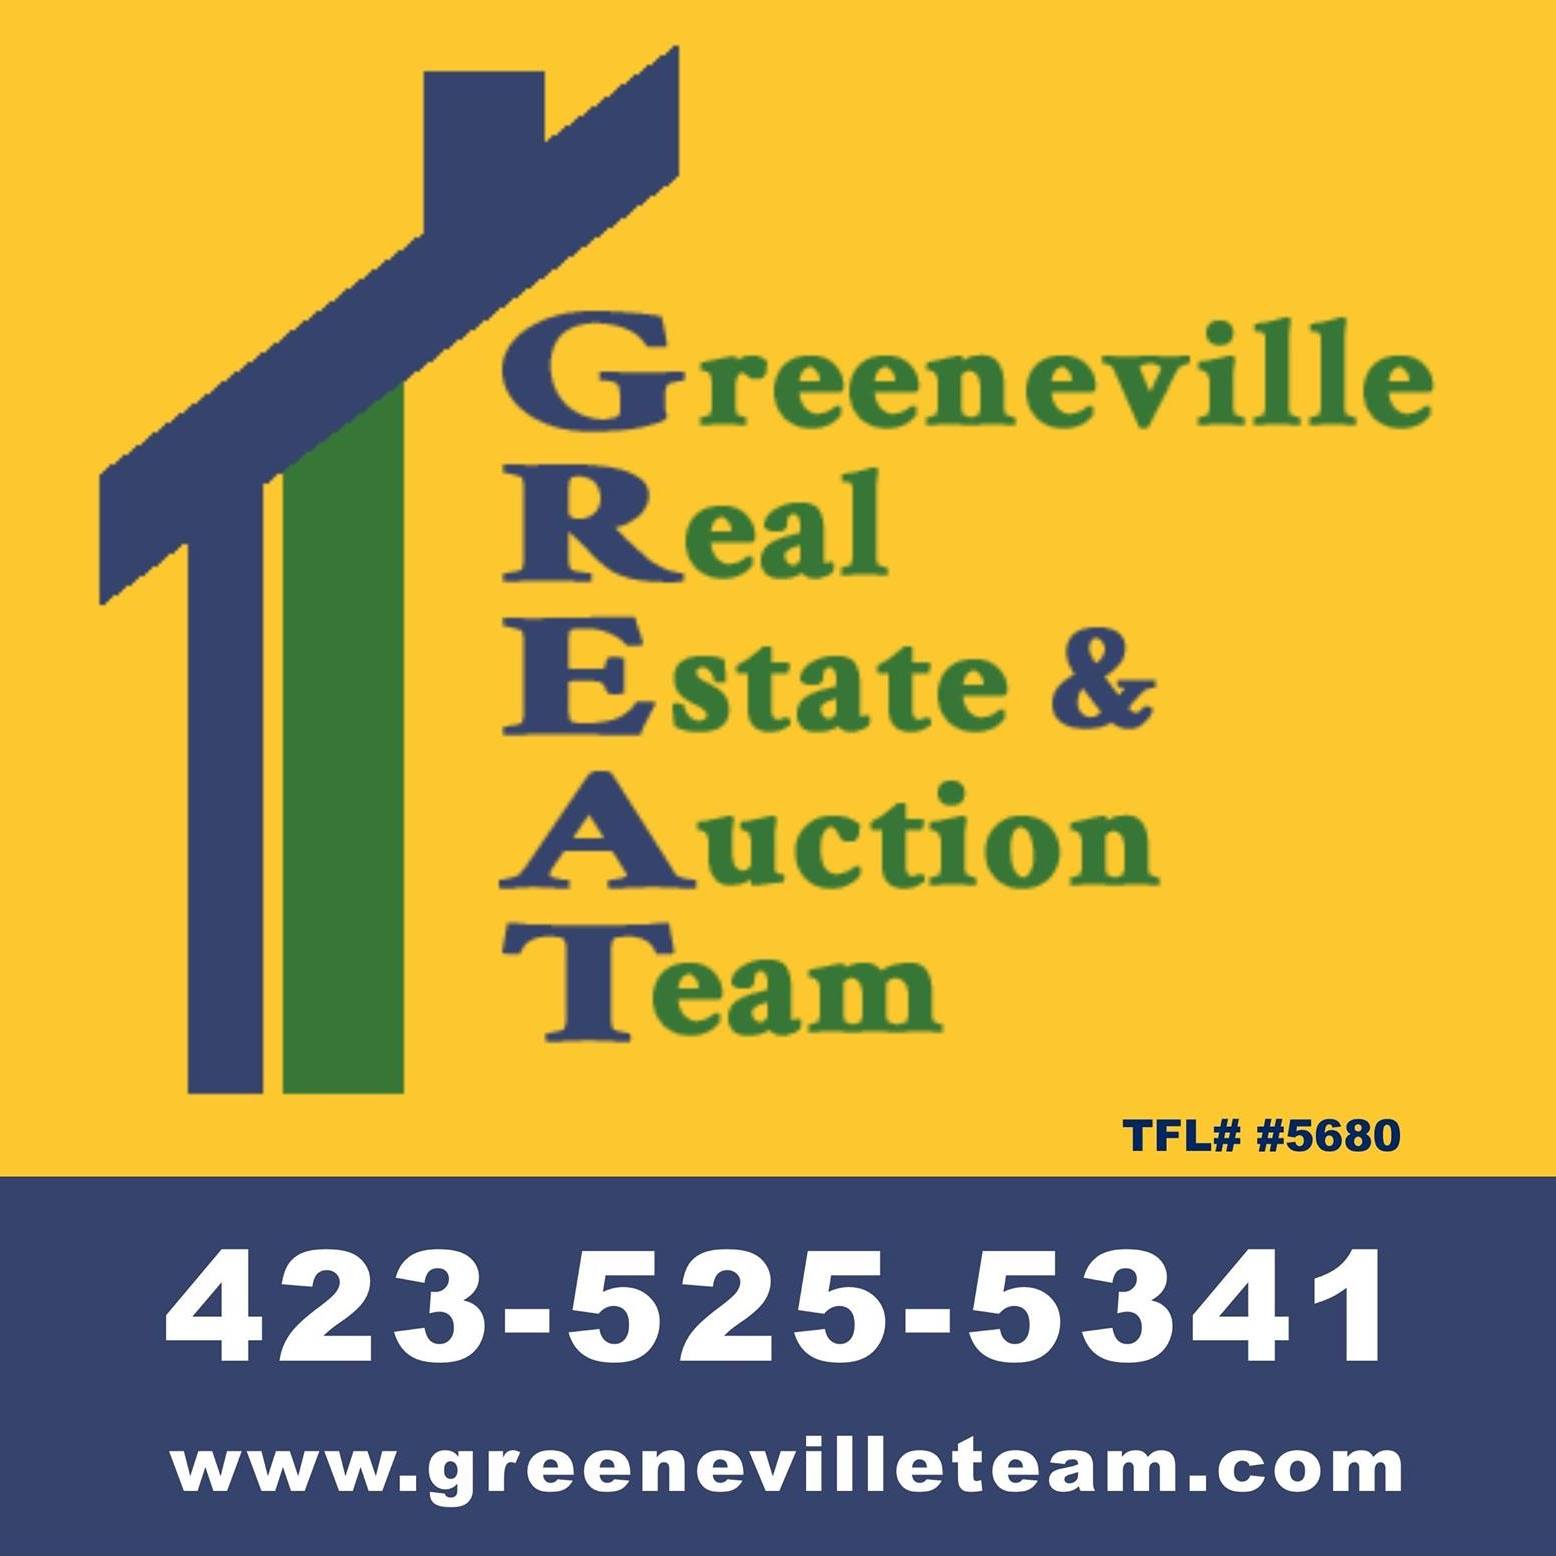 Greeneville Real Estate and Auction Team